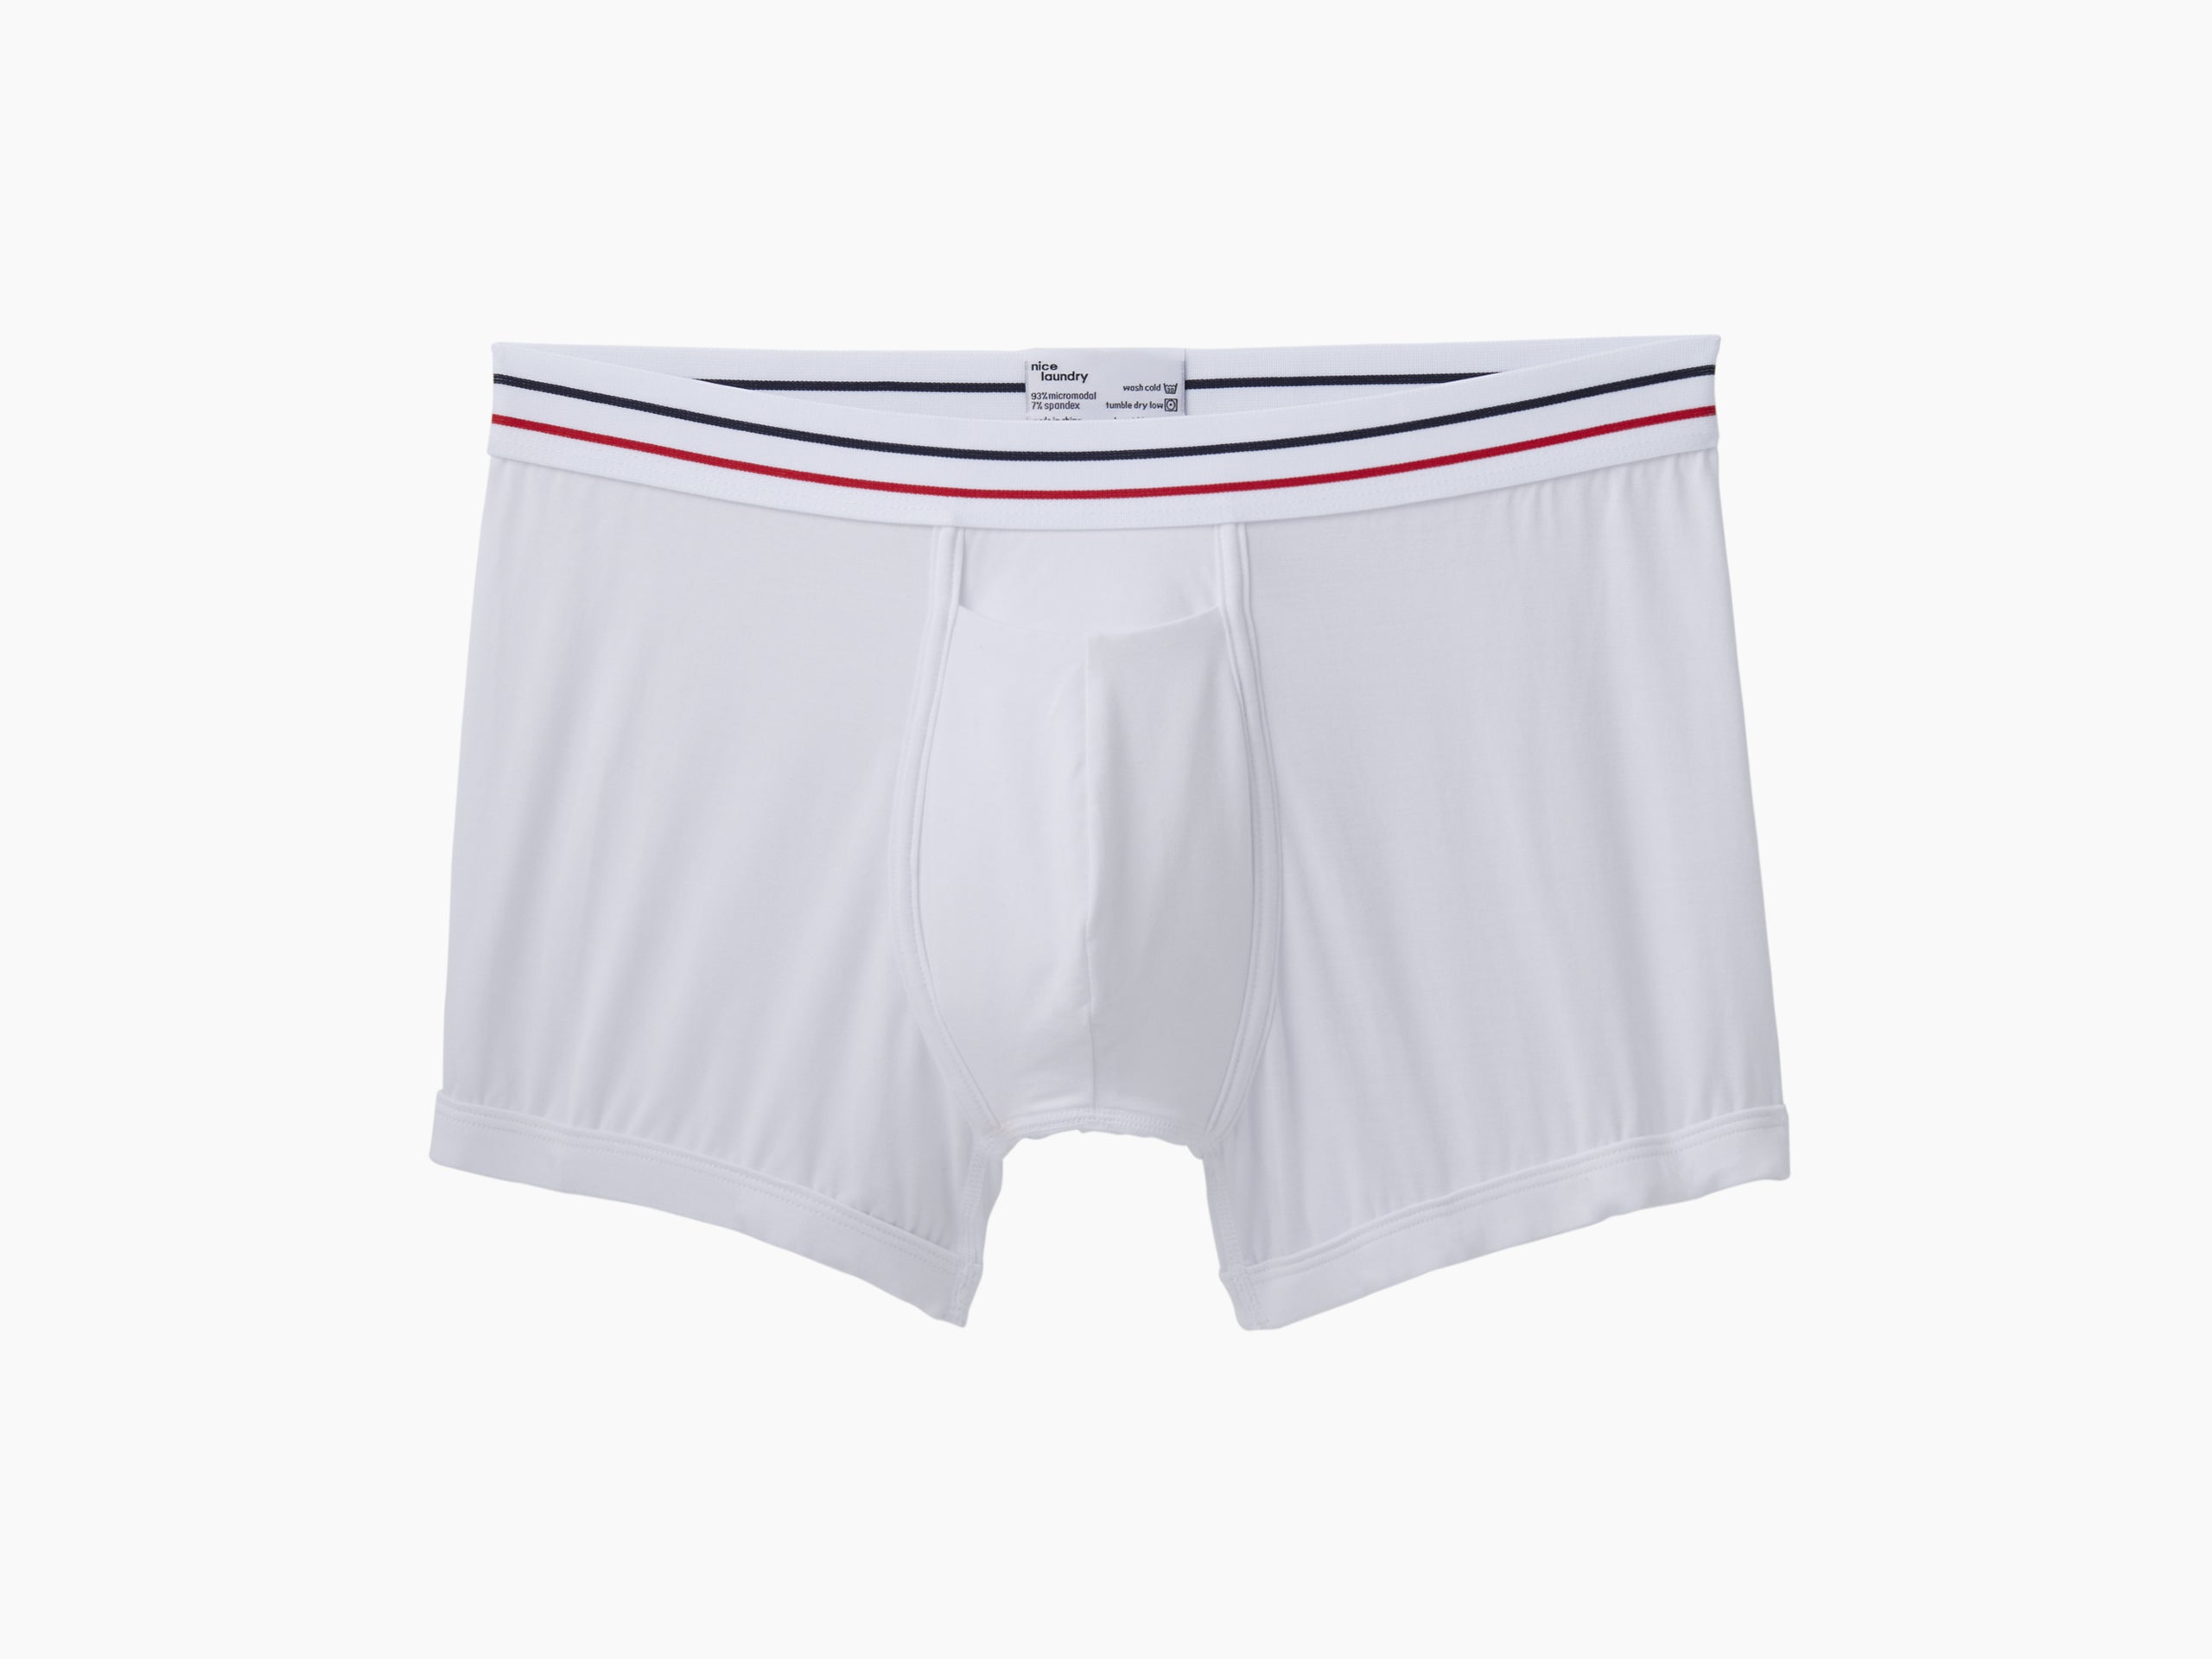 Boxer Brief ~ All-American White – Nice Laundry